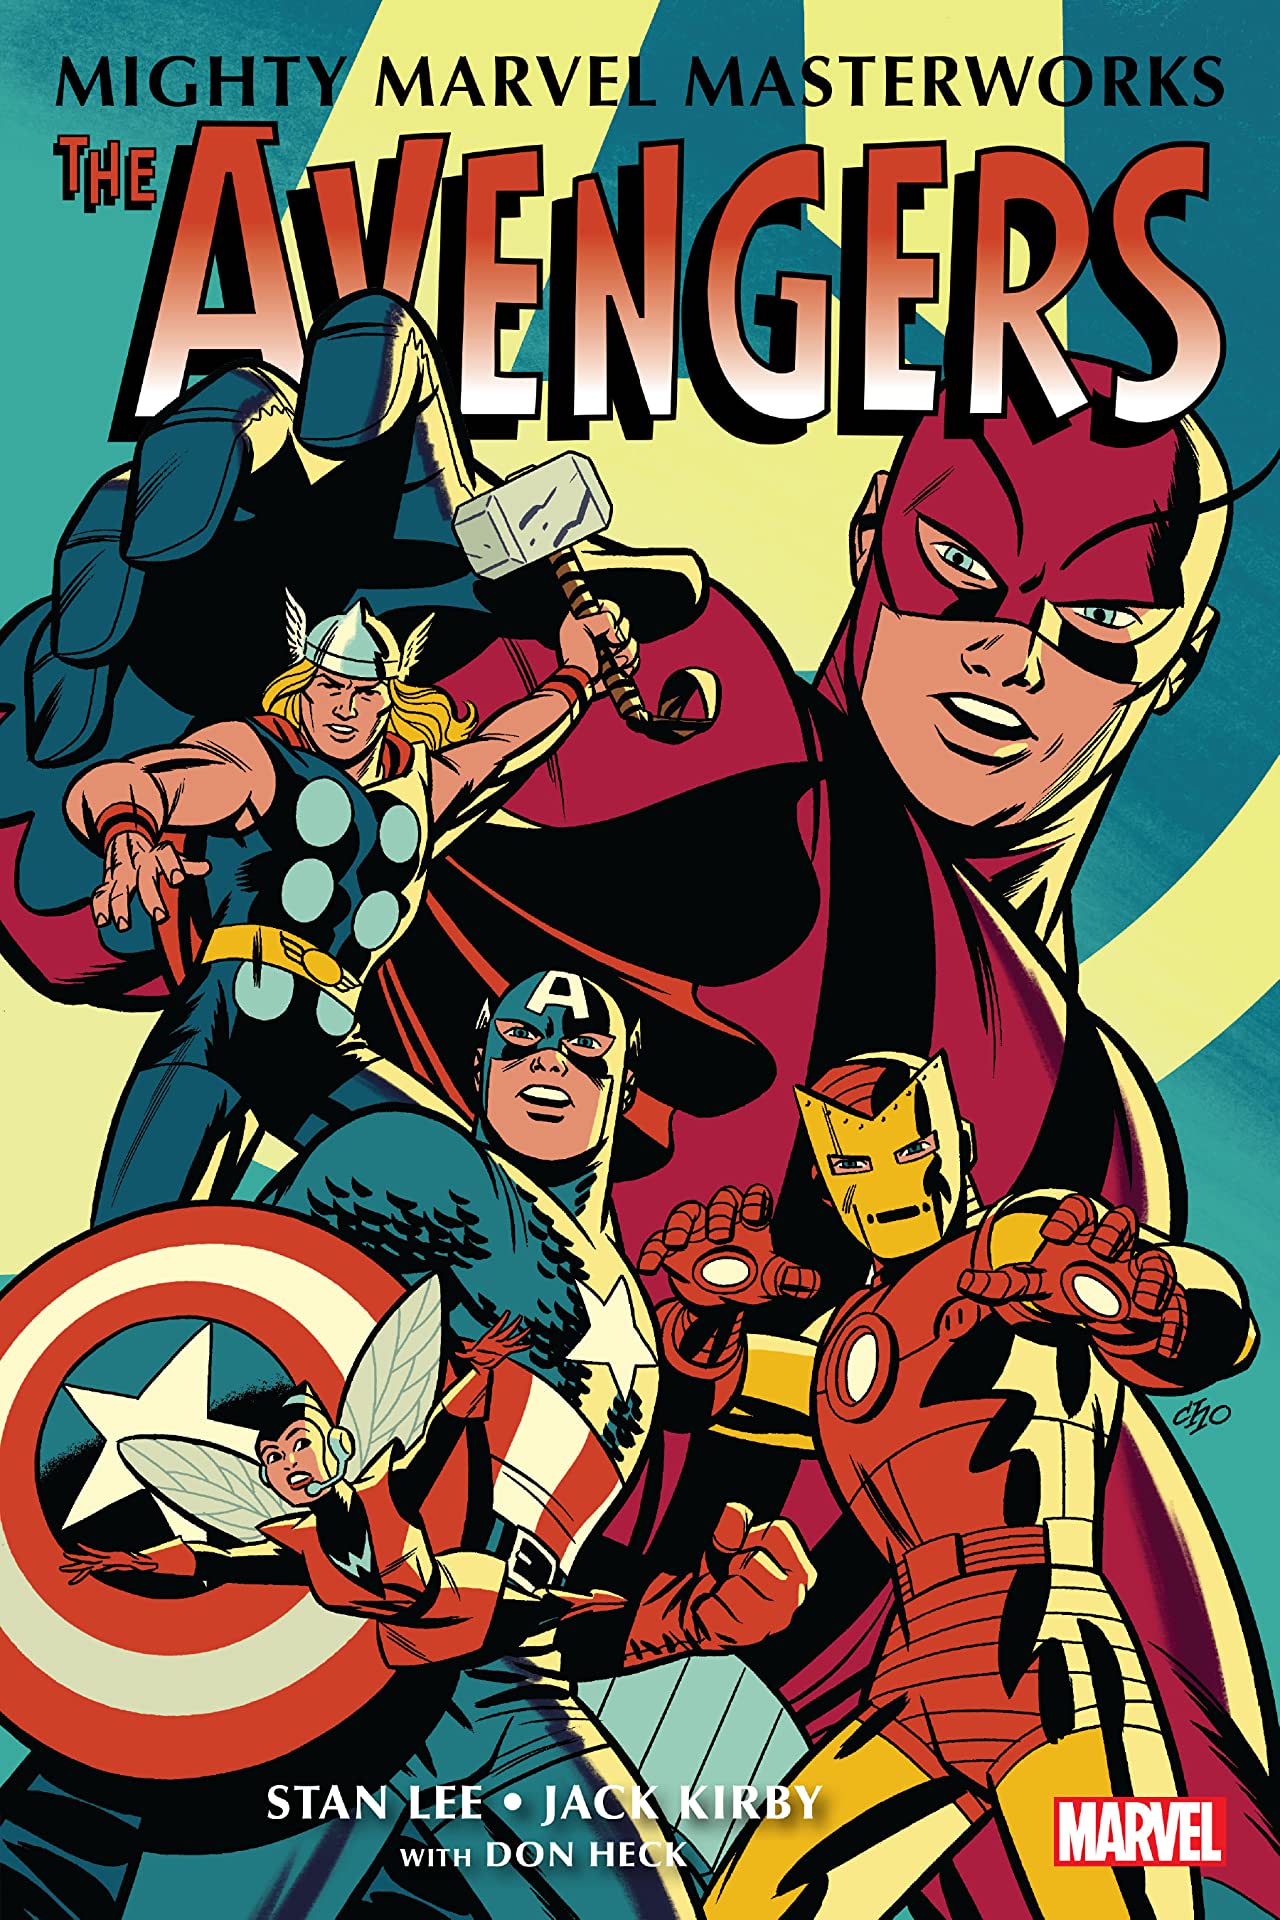 Mighty Marvel Masterworks: The Avengers Vol. 1: The Coming of the Avengers (Trade Paperback)